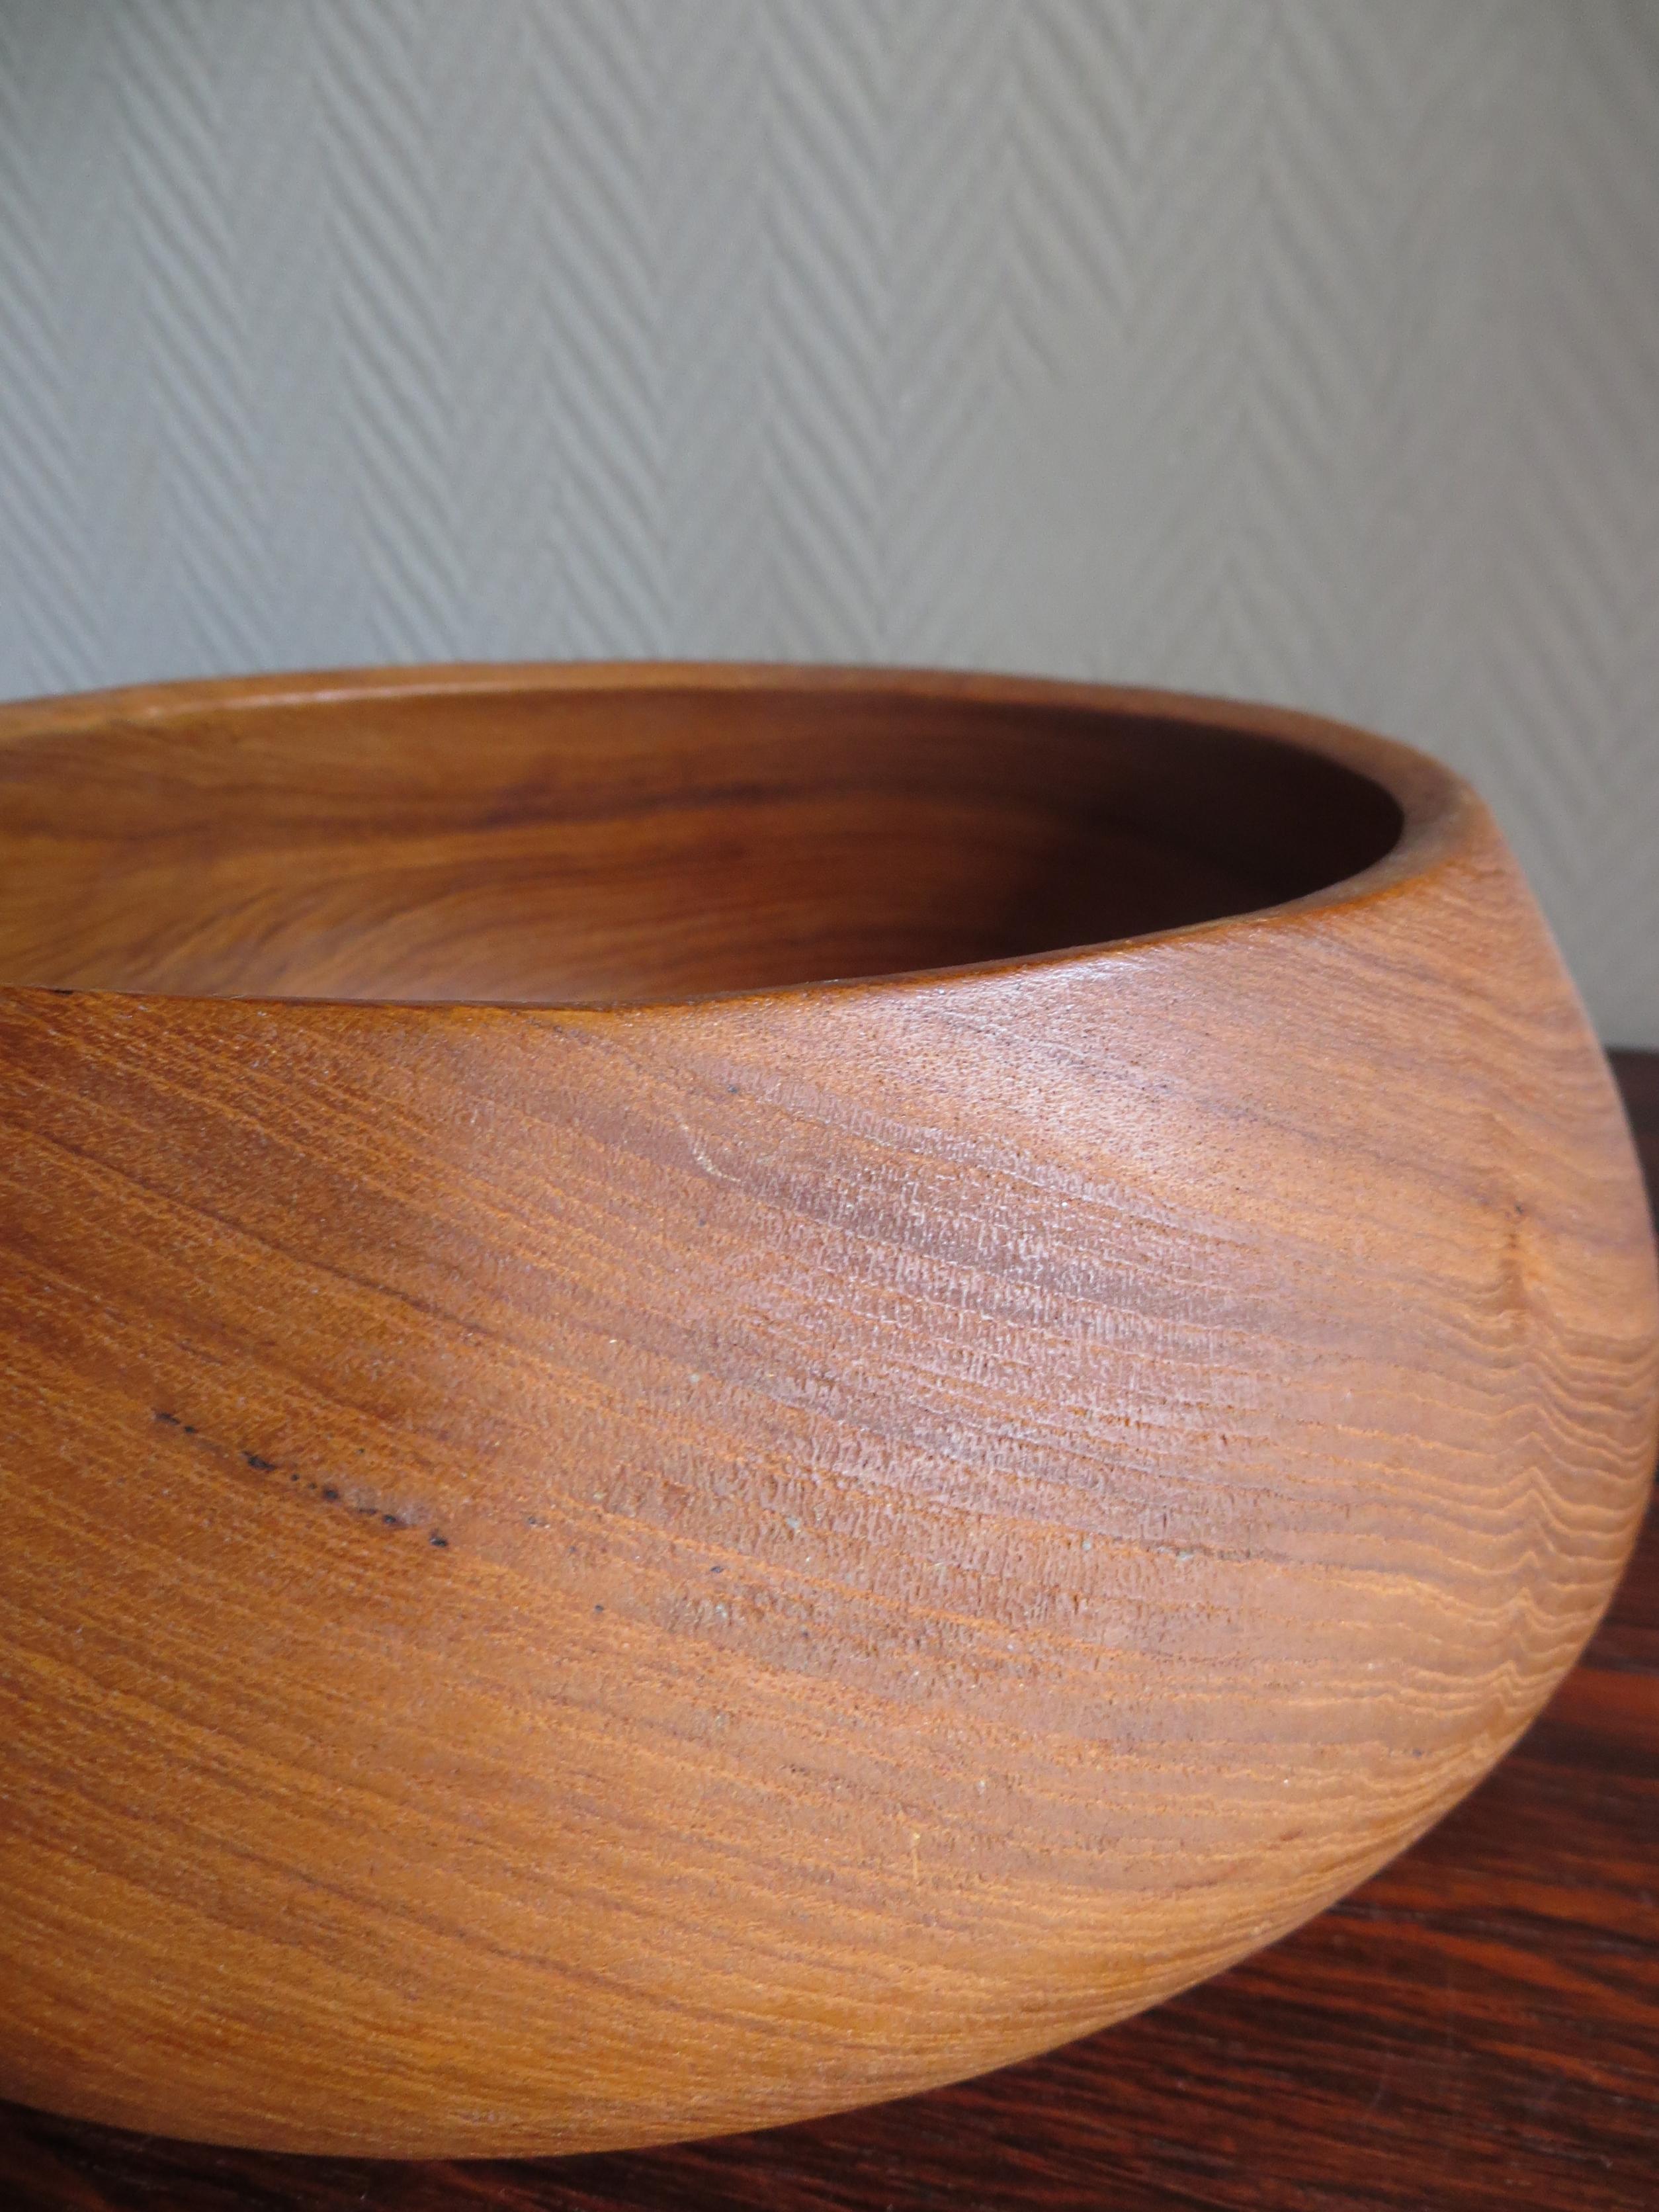 Large Danish Midcentury Hand Moulded & Organic Rounded Shaped Teak Bowl , 1950s For Sale 1